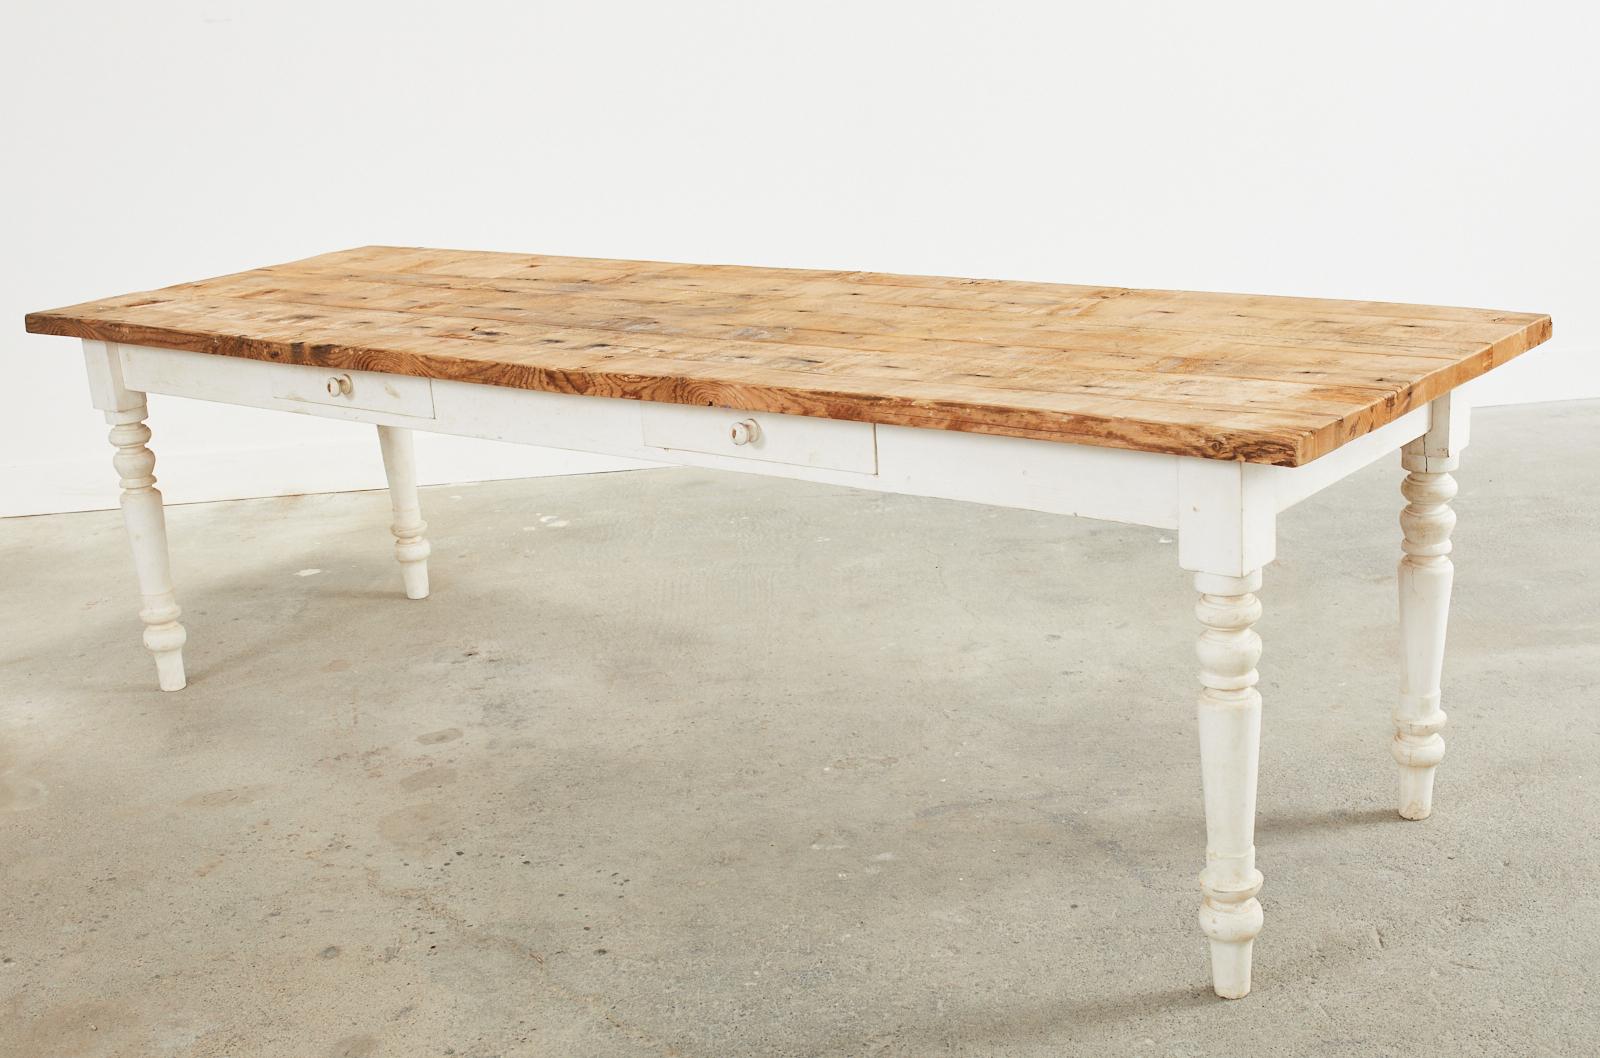 20th Century American Country Painted Pine Farmhouse Dining Harvest Table For Sale